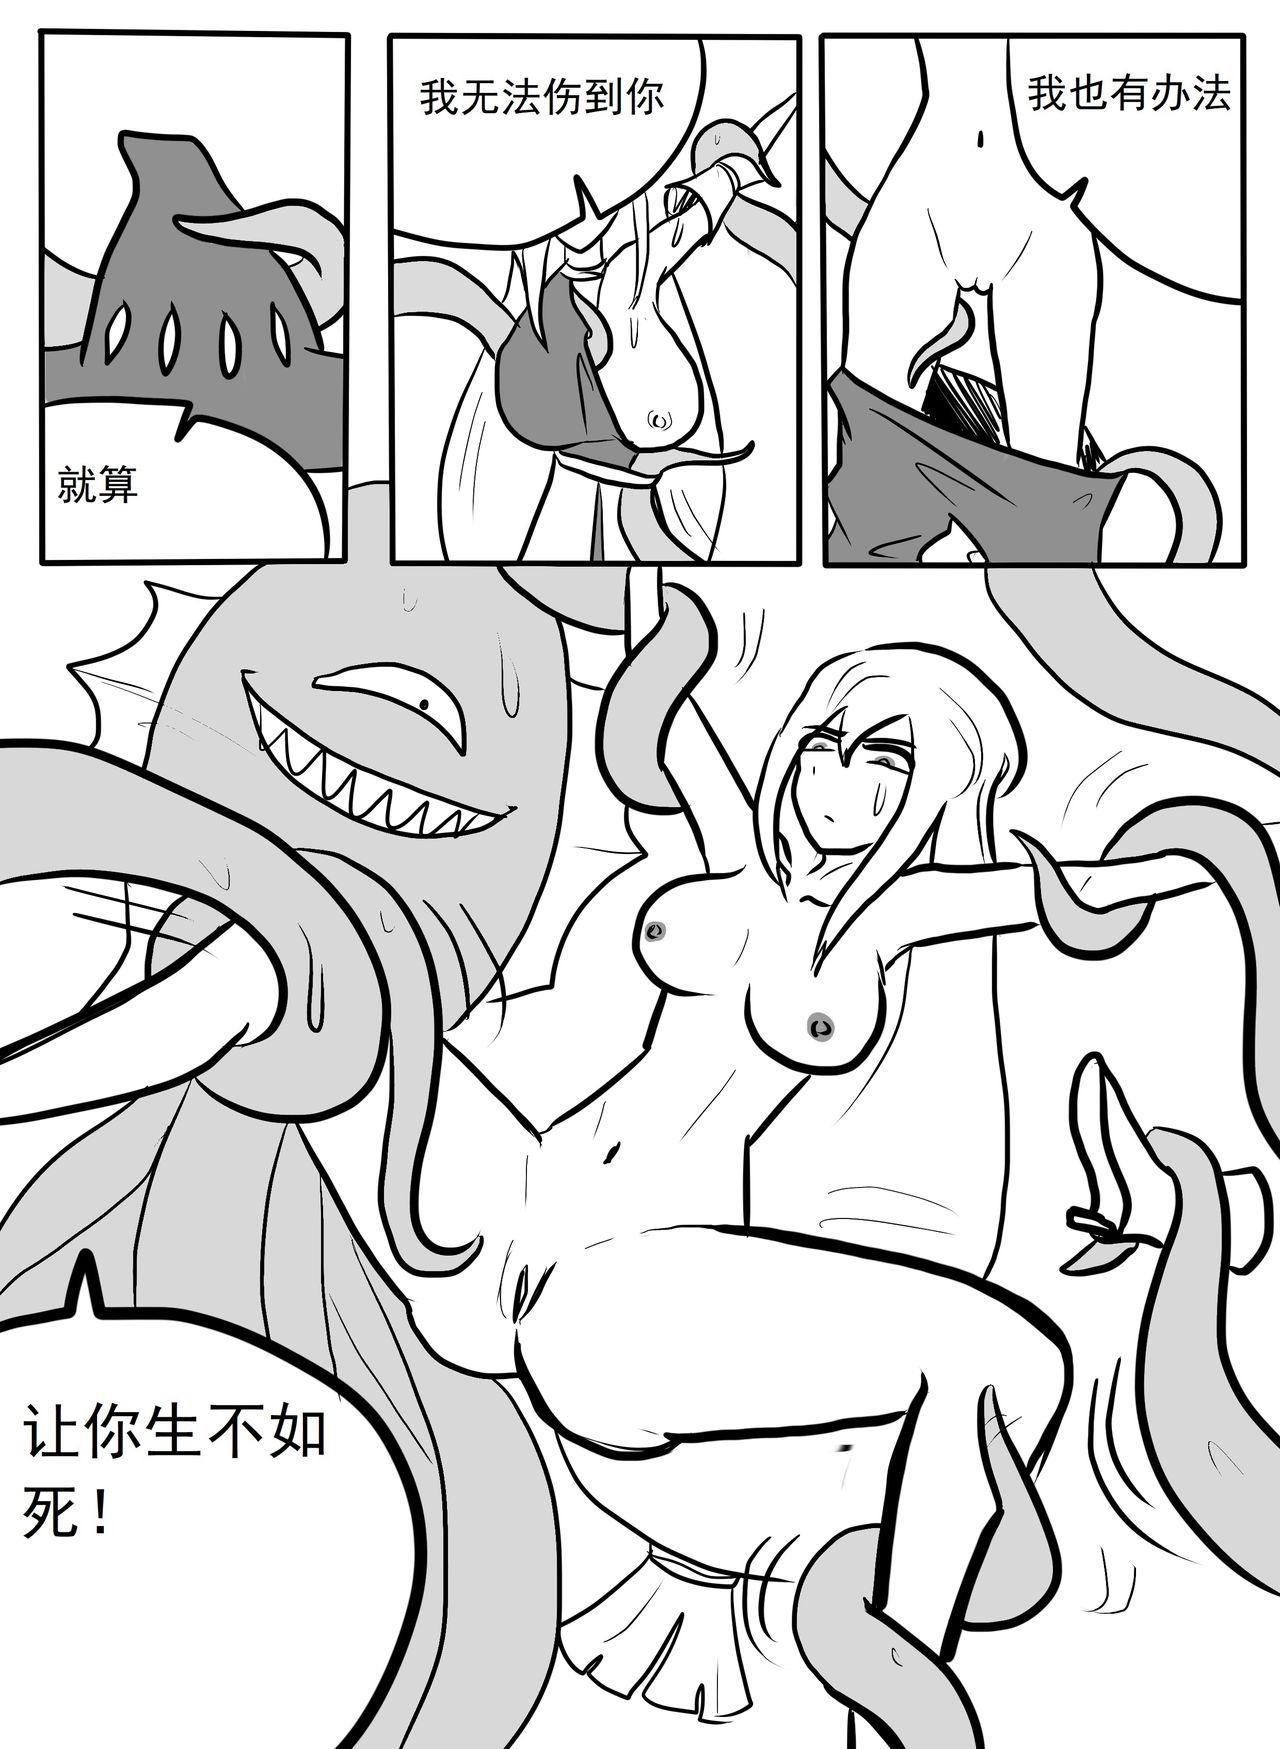 Mexican 斯卡蒂触手搔痒调教 - Arknights Shemale Sex - Page 6